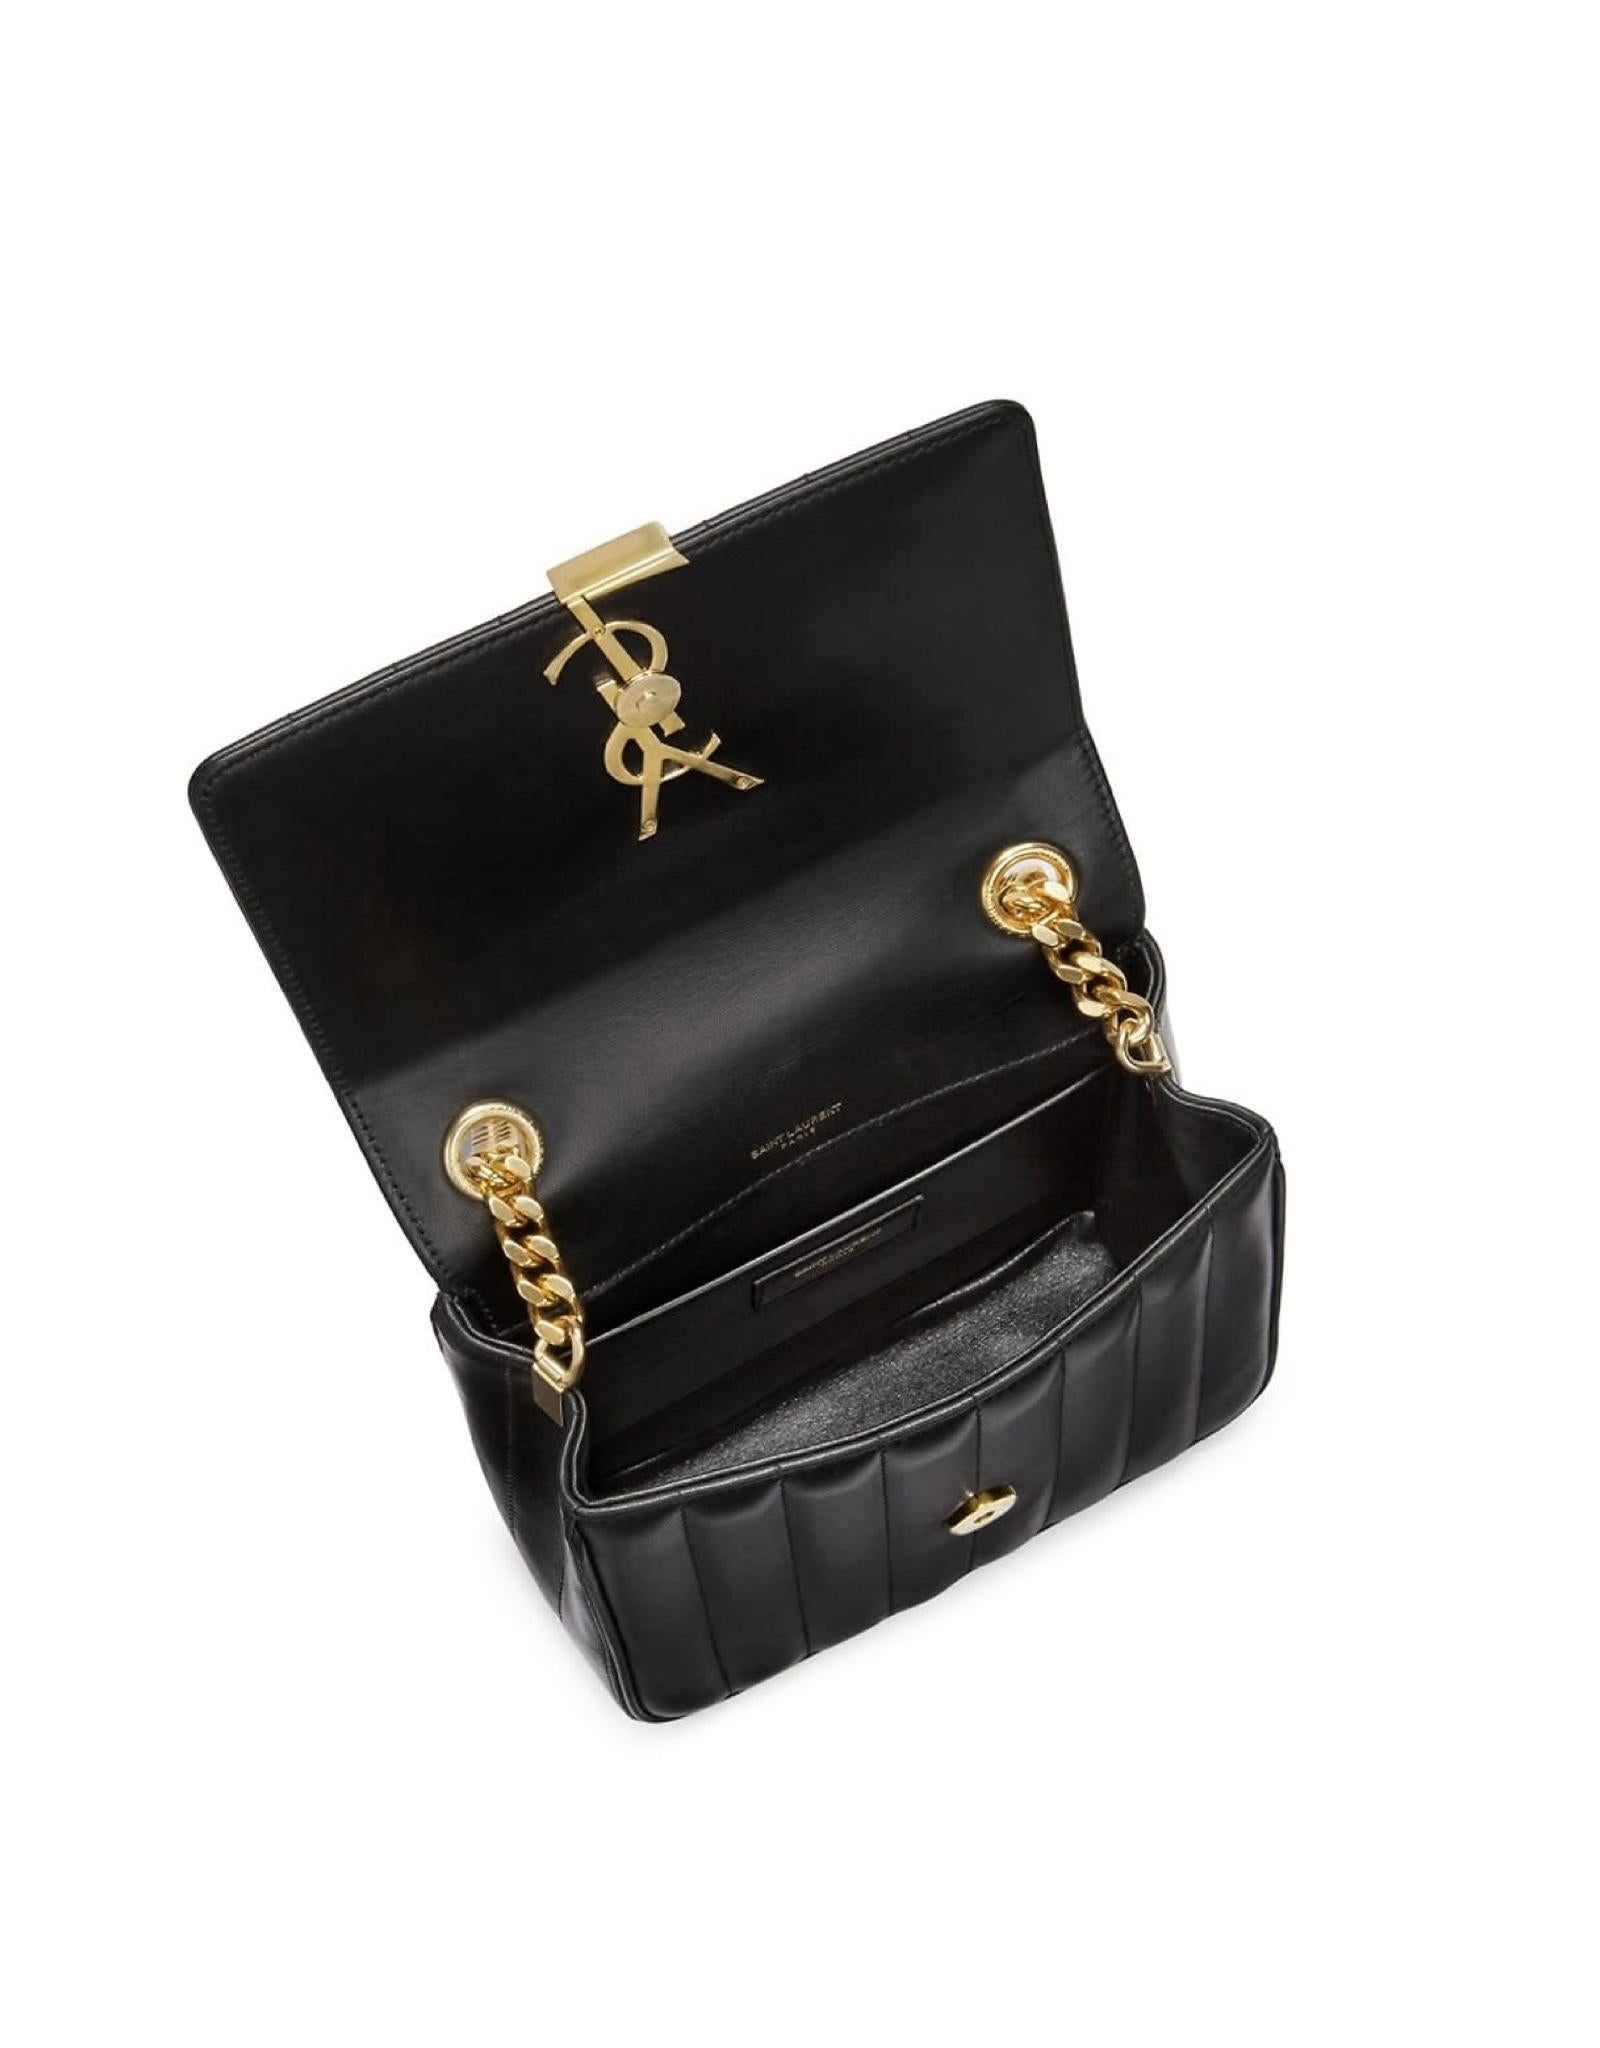 This Saint Laurent bad is made with black leather with matelassé stitching and features the iconic gold tone logo, snap-button flap closure, gold tone hardware, an interior slip pocket and fabric lining.

COLOR: Black
MATERIAL: Leather
ITEM CODE: